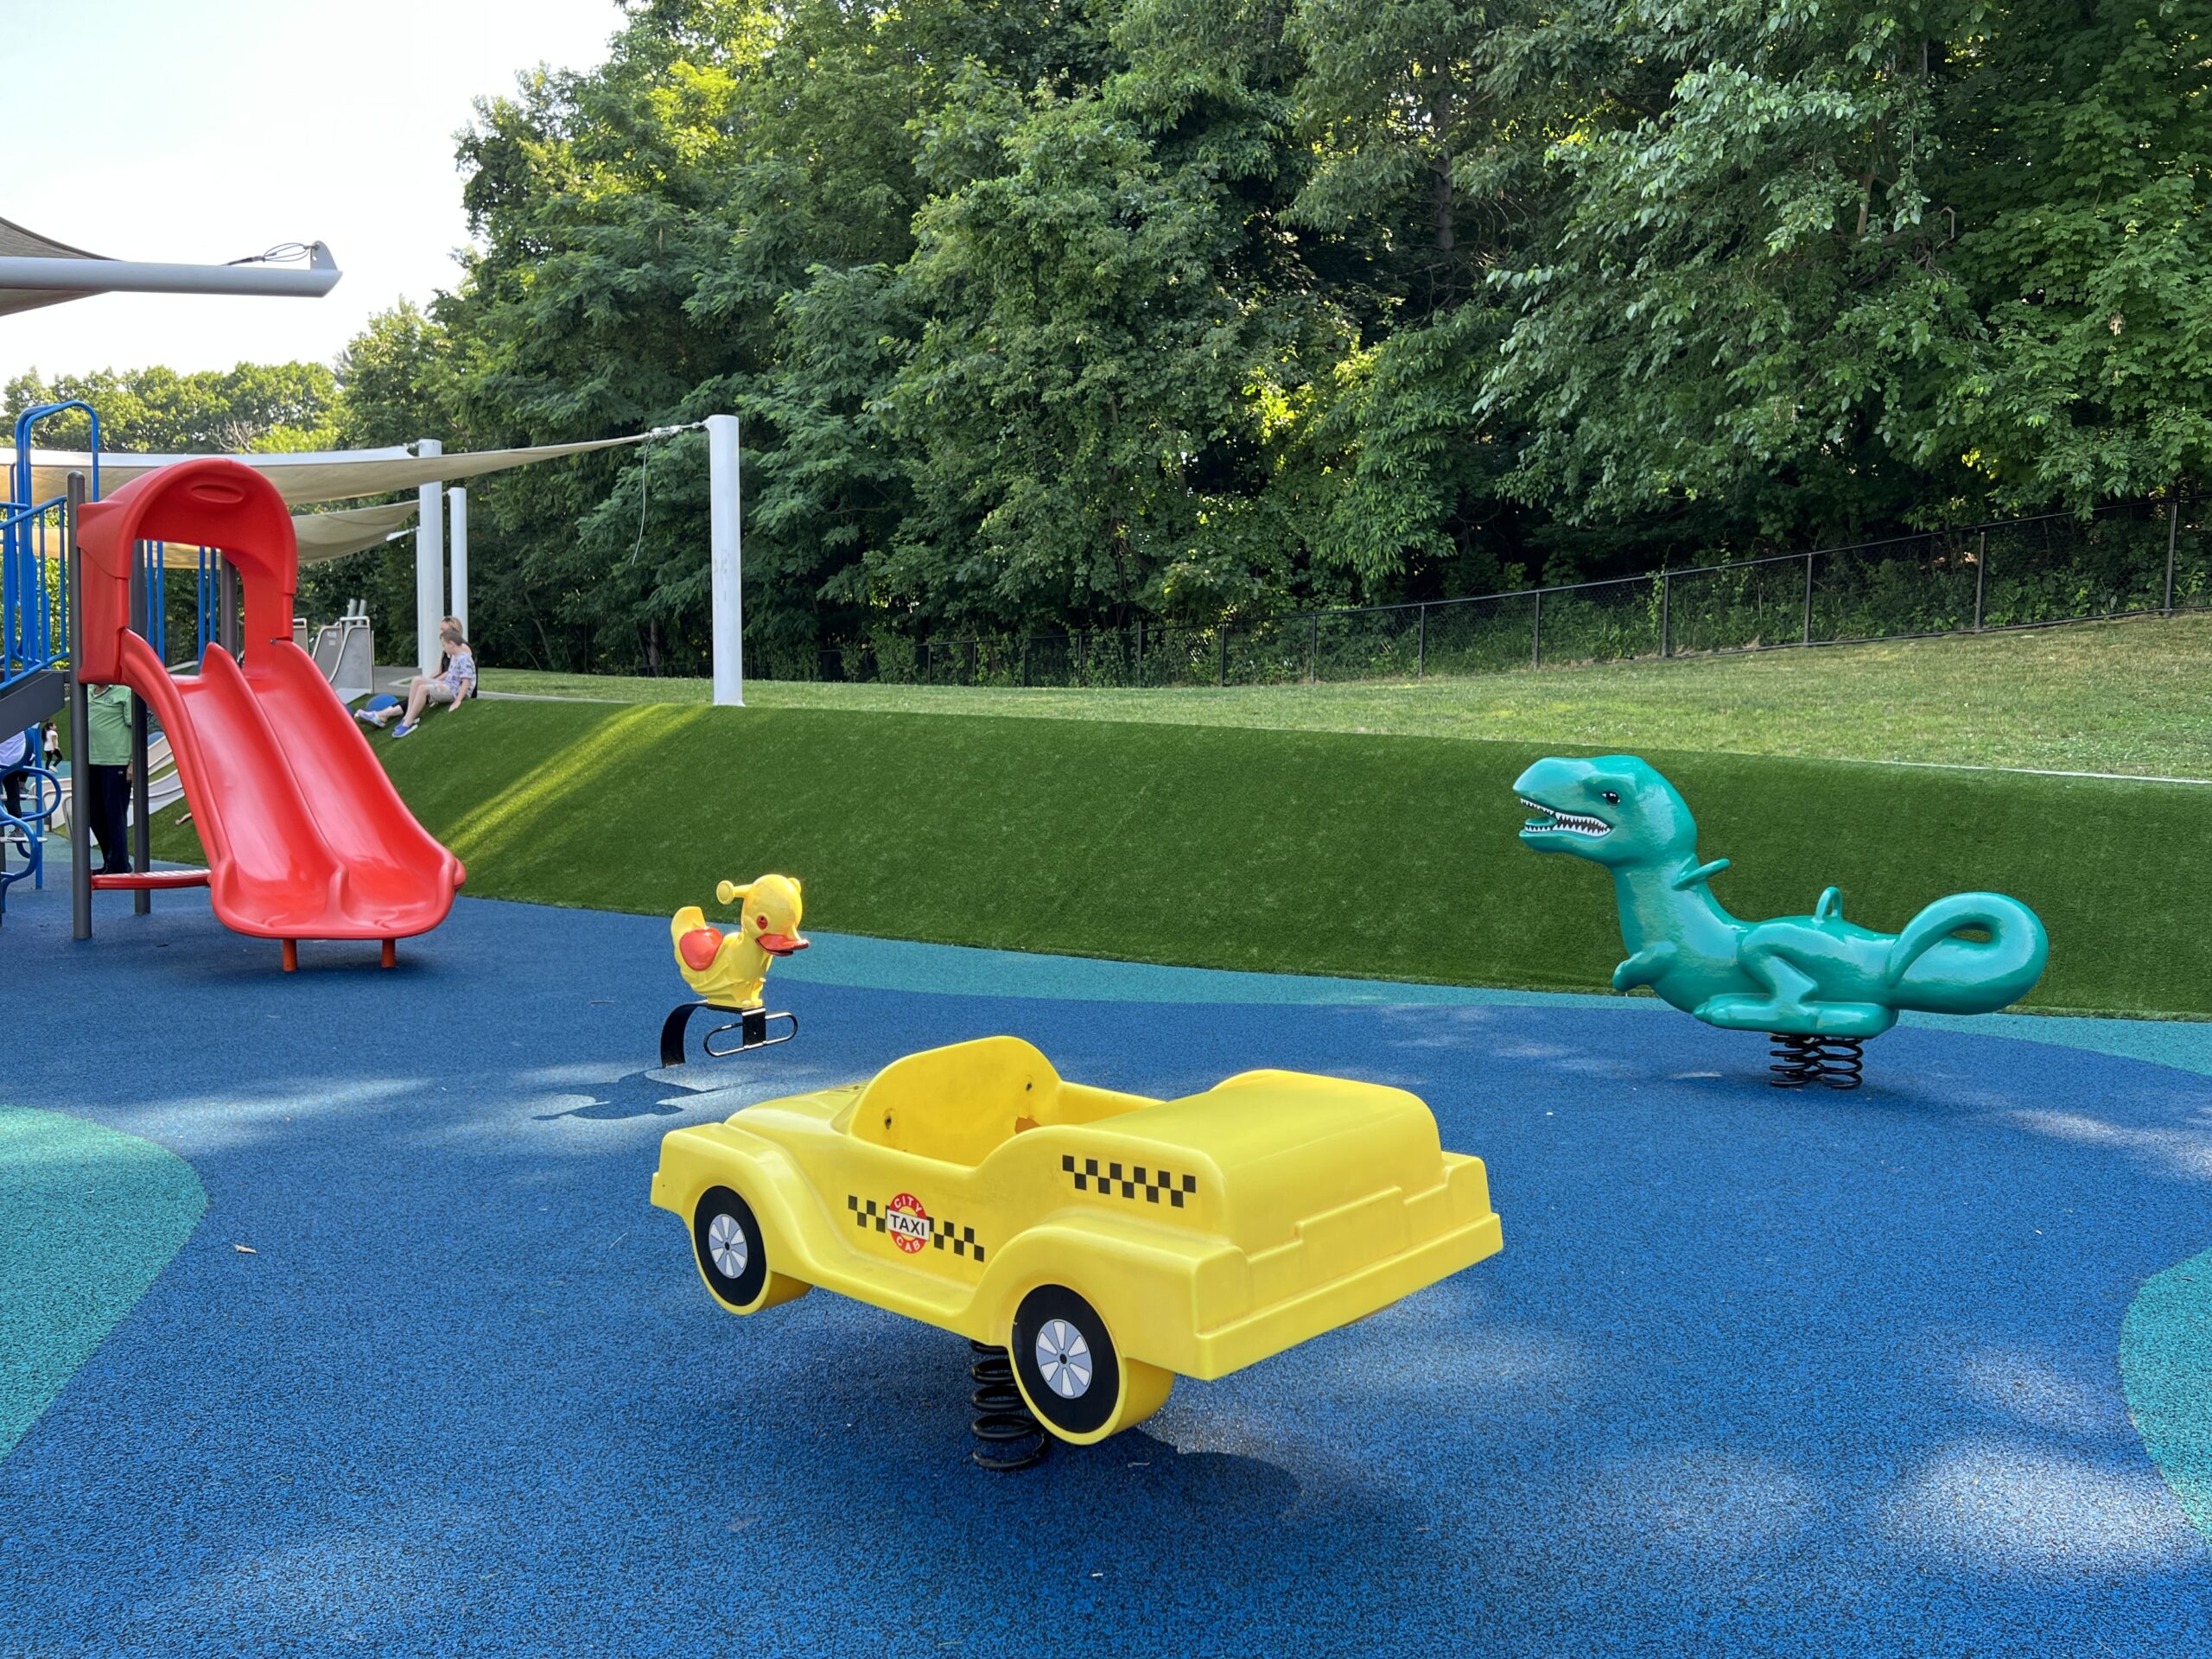 Verona Park Playground in Verona NJ - Features - Ride on toys taxi, dinosaur, and duck WIDE image